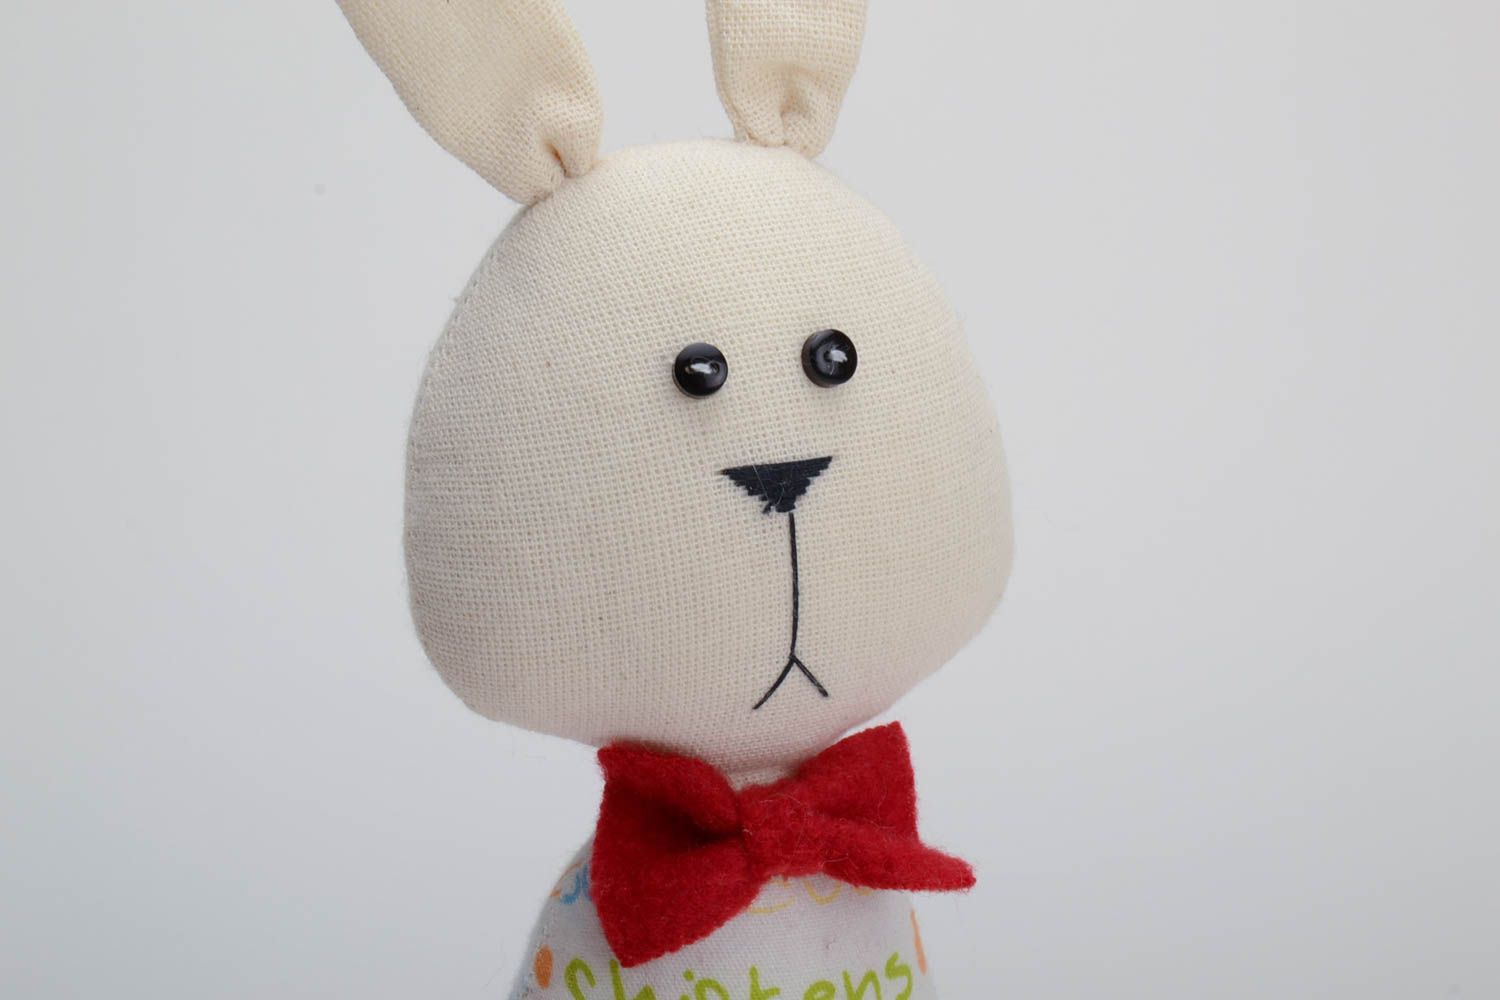 Handmade small cotton fabric soft toy rabbit in striped trousers with red bow tie photo 4